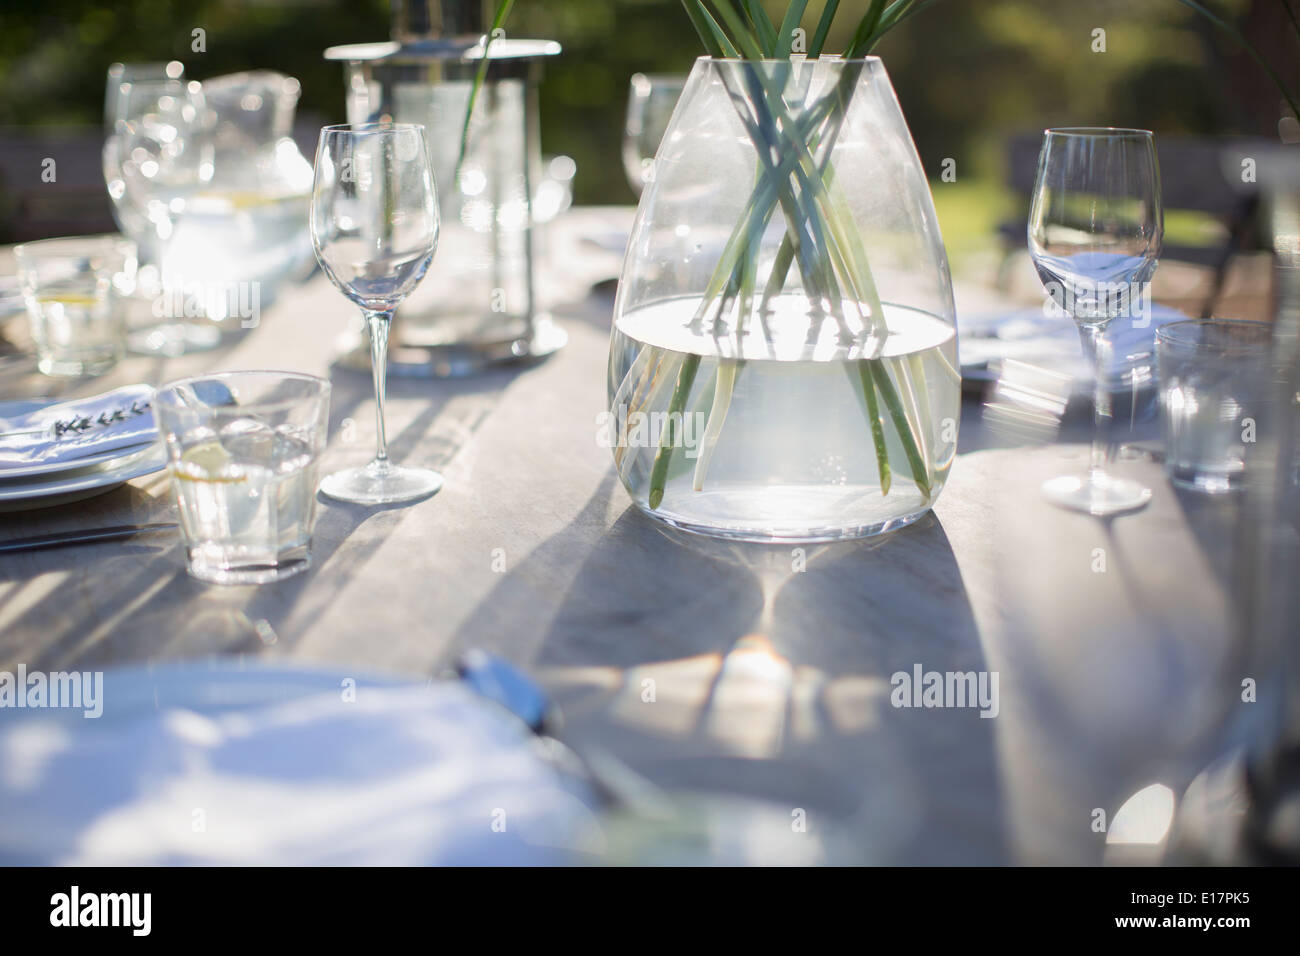 Vase and place settings on sunny patio table Stock Photo